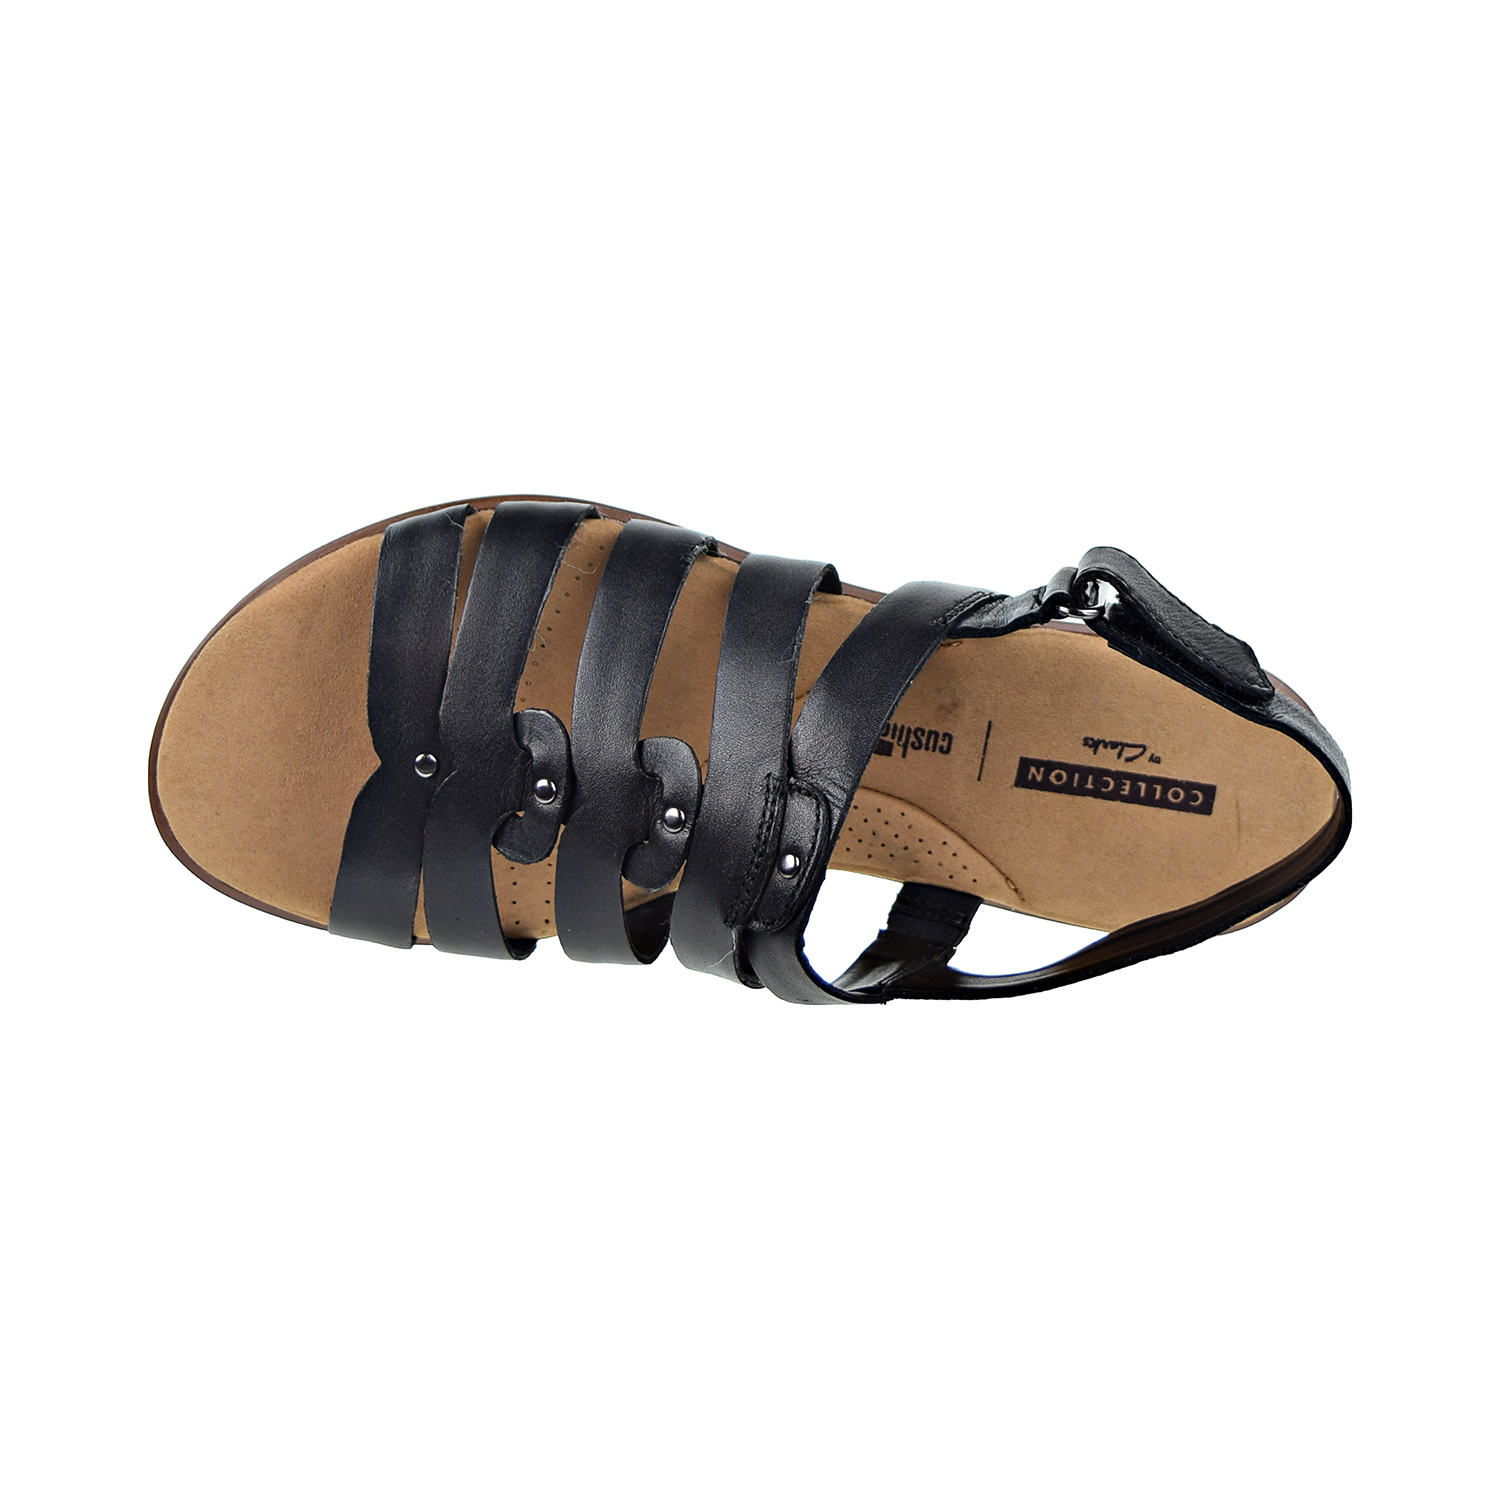 clarks fisherman sandals with backstrap